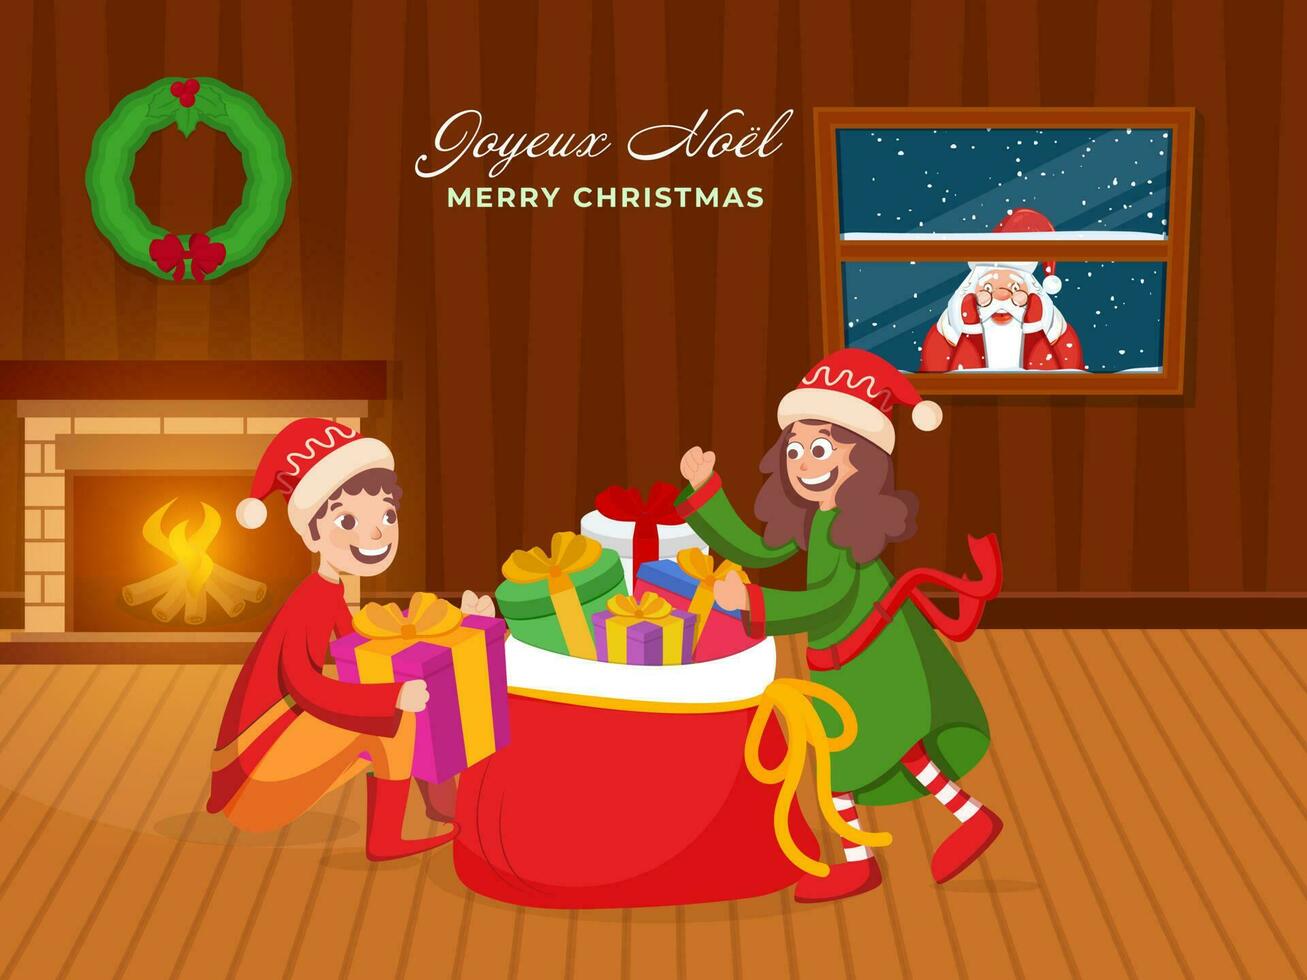 Santa Claus Peeking Through Window With Cheerful Kids Character, Gifts Sack And Fireplace In Interior View For Merry Christmas. vector